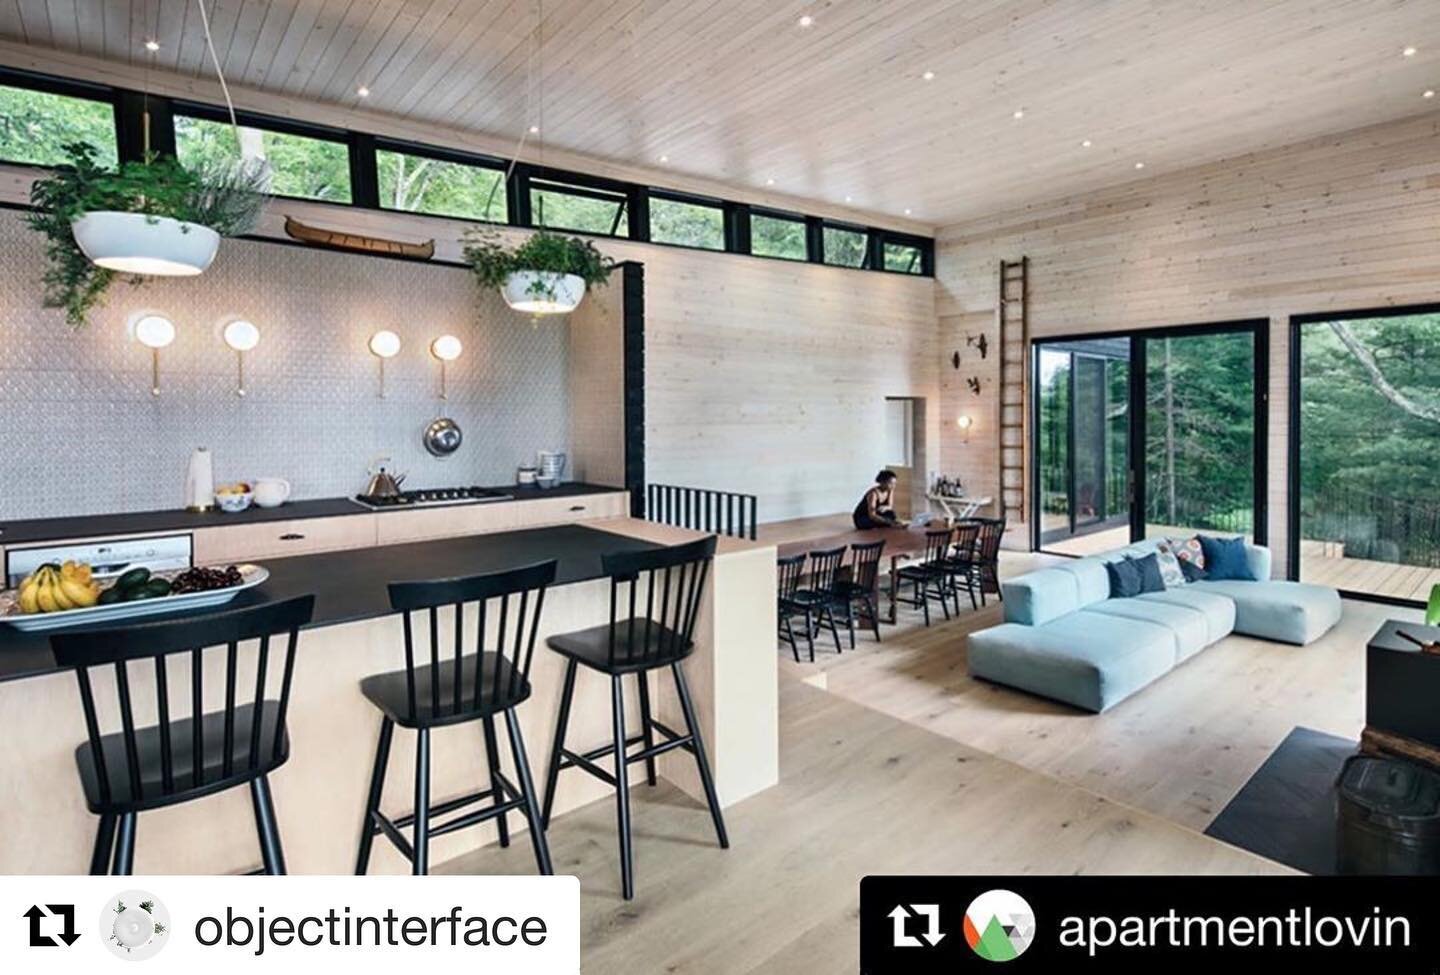 #Repost @objectinterface and @apartmentlovin of our image of a stunning, light-filled cottage by @vfarchitect ・・・
#Repost @apartmentlovin featuring our Well Planter Lights 🌿💡 and new Hook Sconces ✨
・・・
Lakeside modern cottage by @vfarchitect takes 